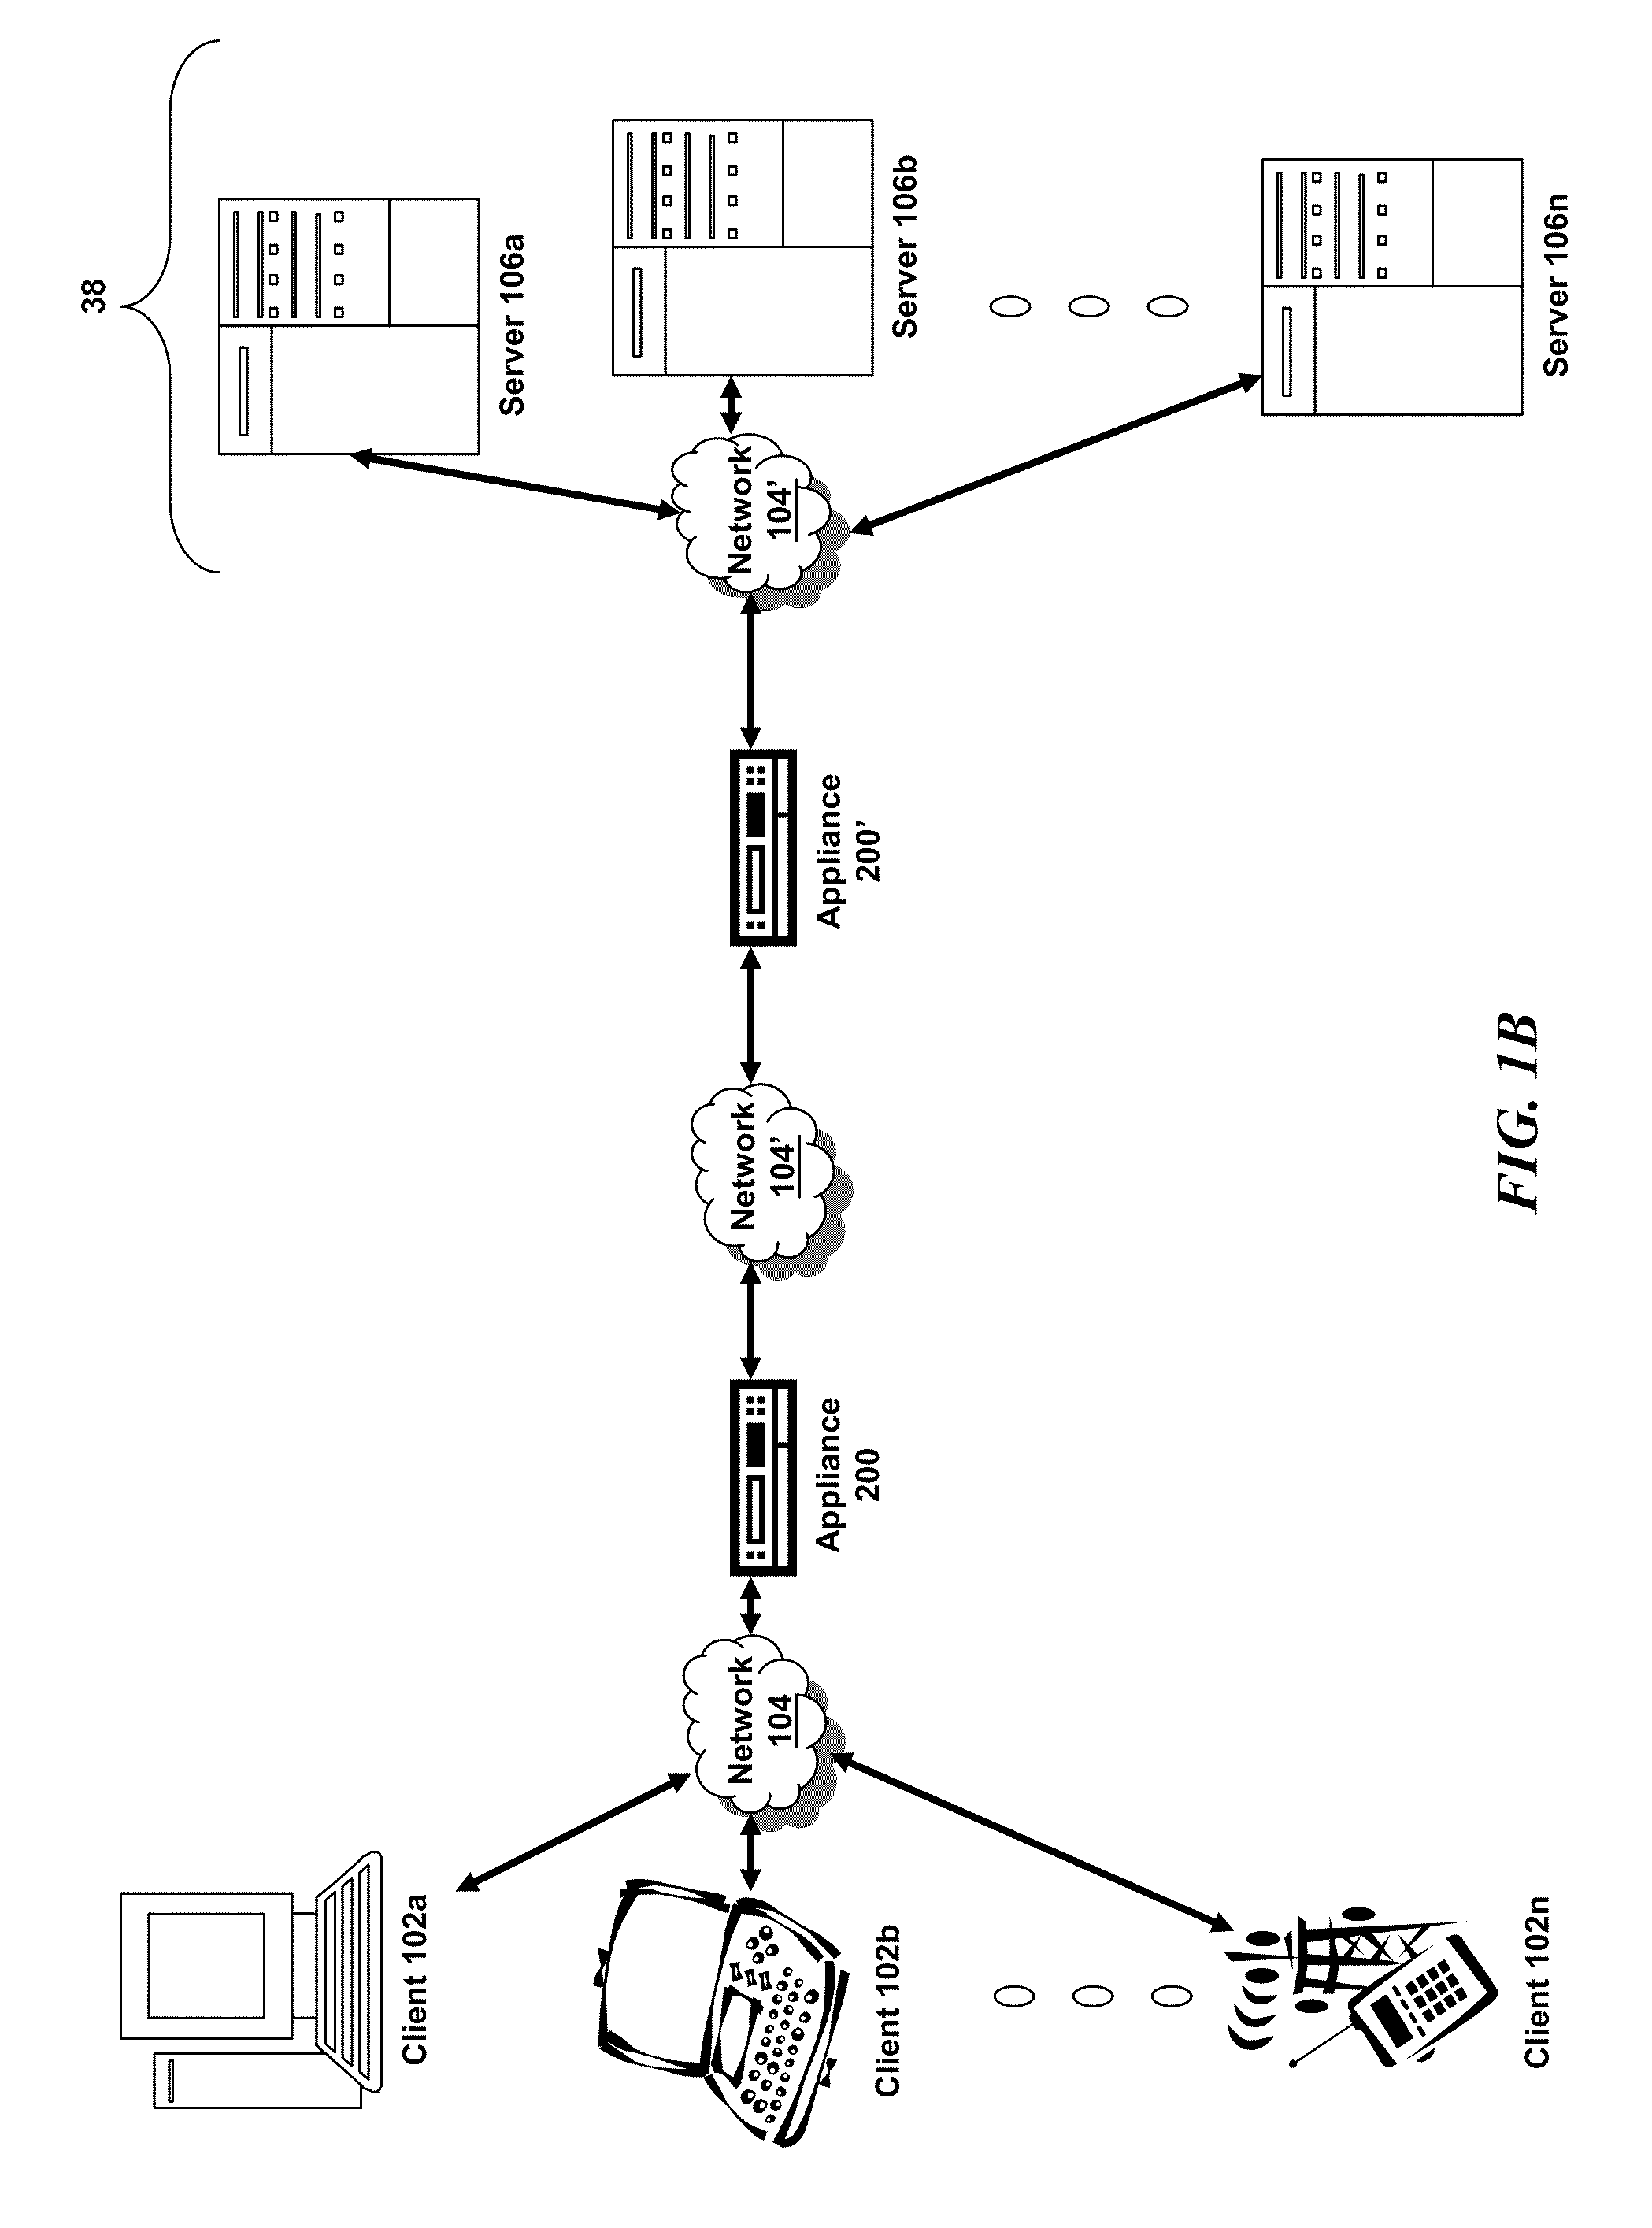 Systems and methods for managing ports for rtsp across cores in a multi-core system